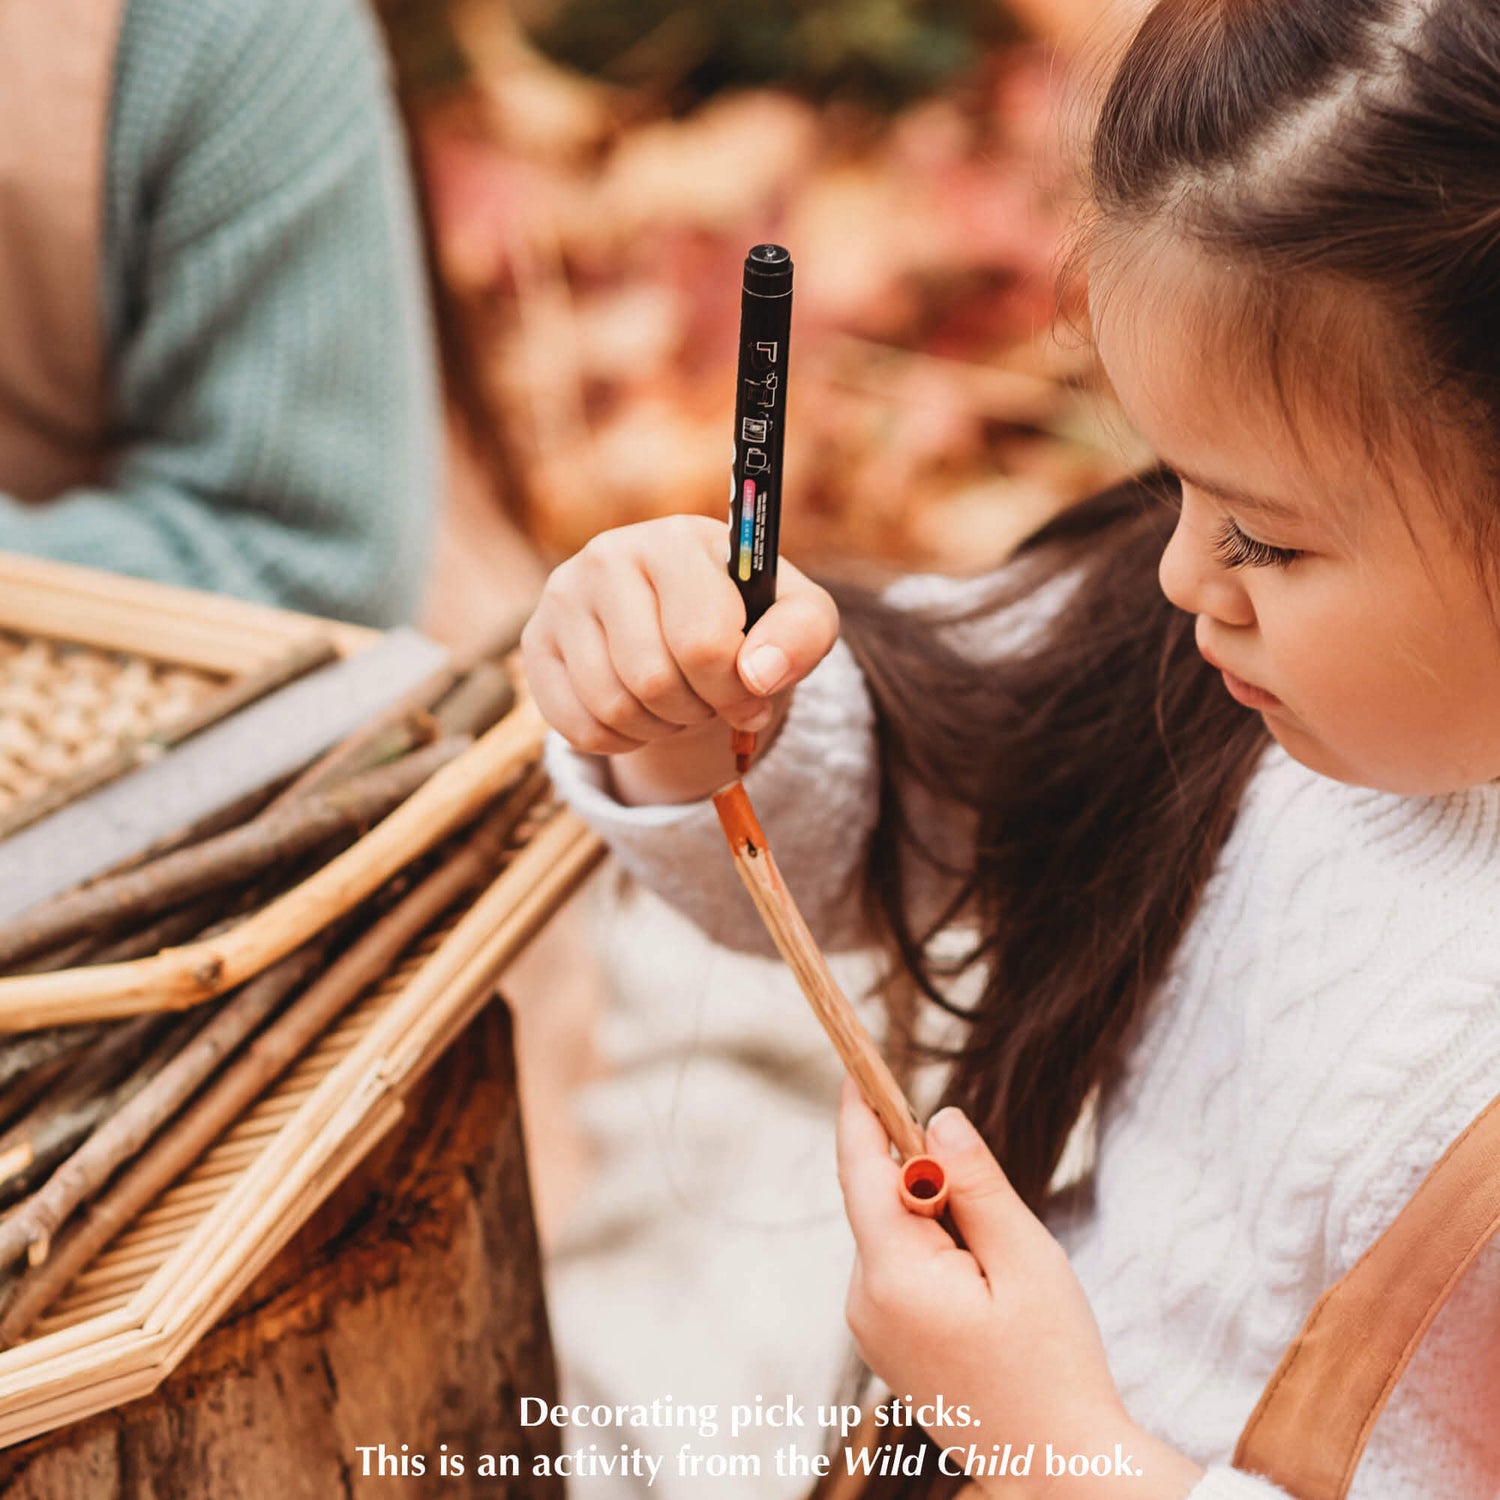 Pick up sticks using paint pens as featured in Nature Craft Starter Pack from Your Wild Books includes Wild Imagination book, Wild Child book, paint pens in classic colours and an opinel beginners whittling knife. Save 20%